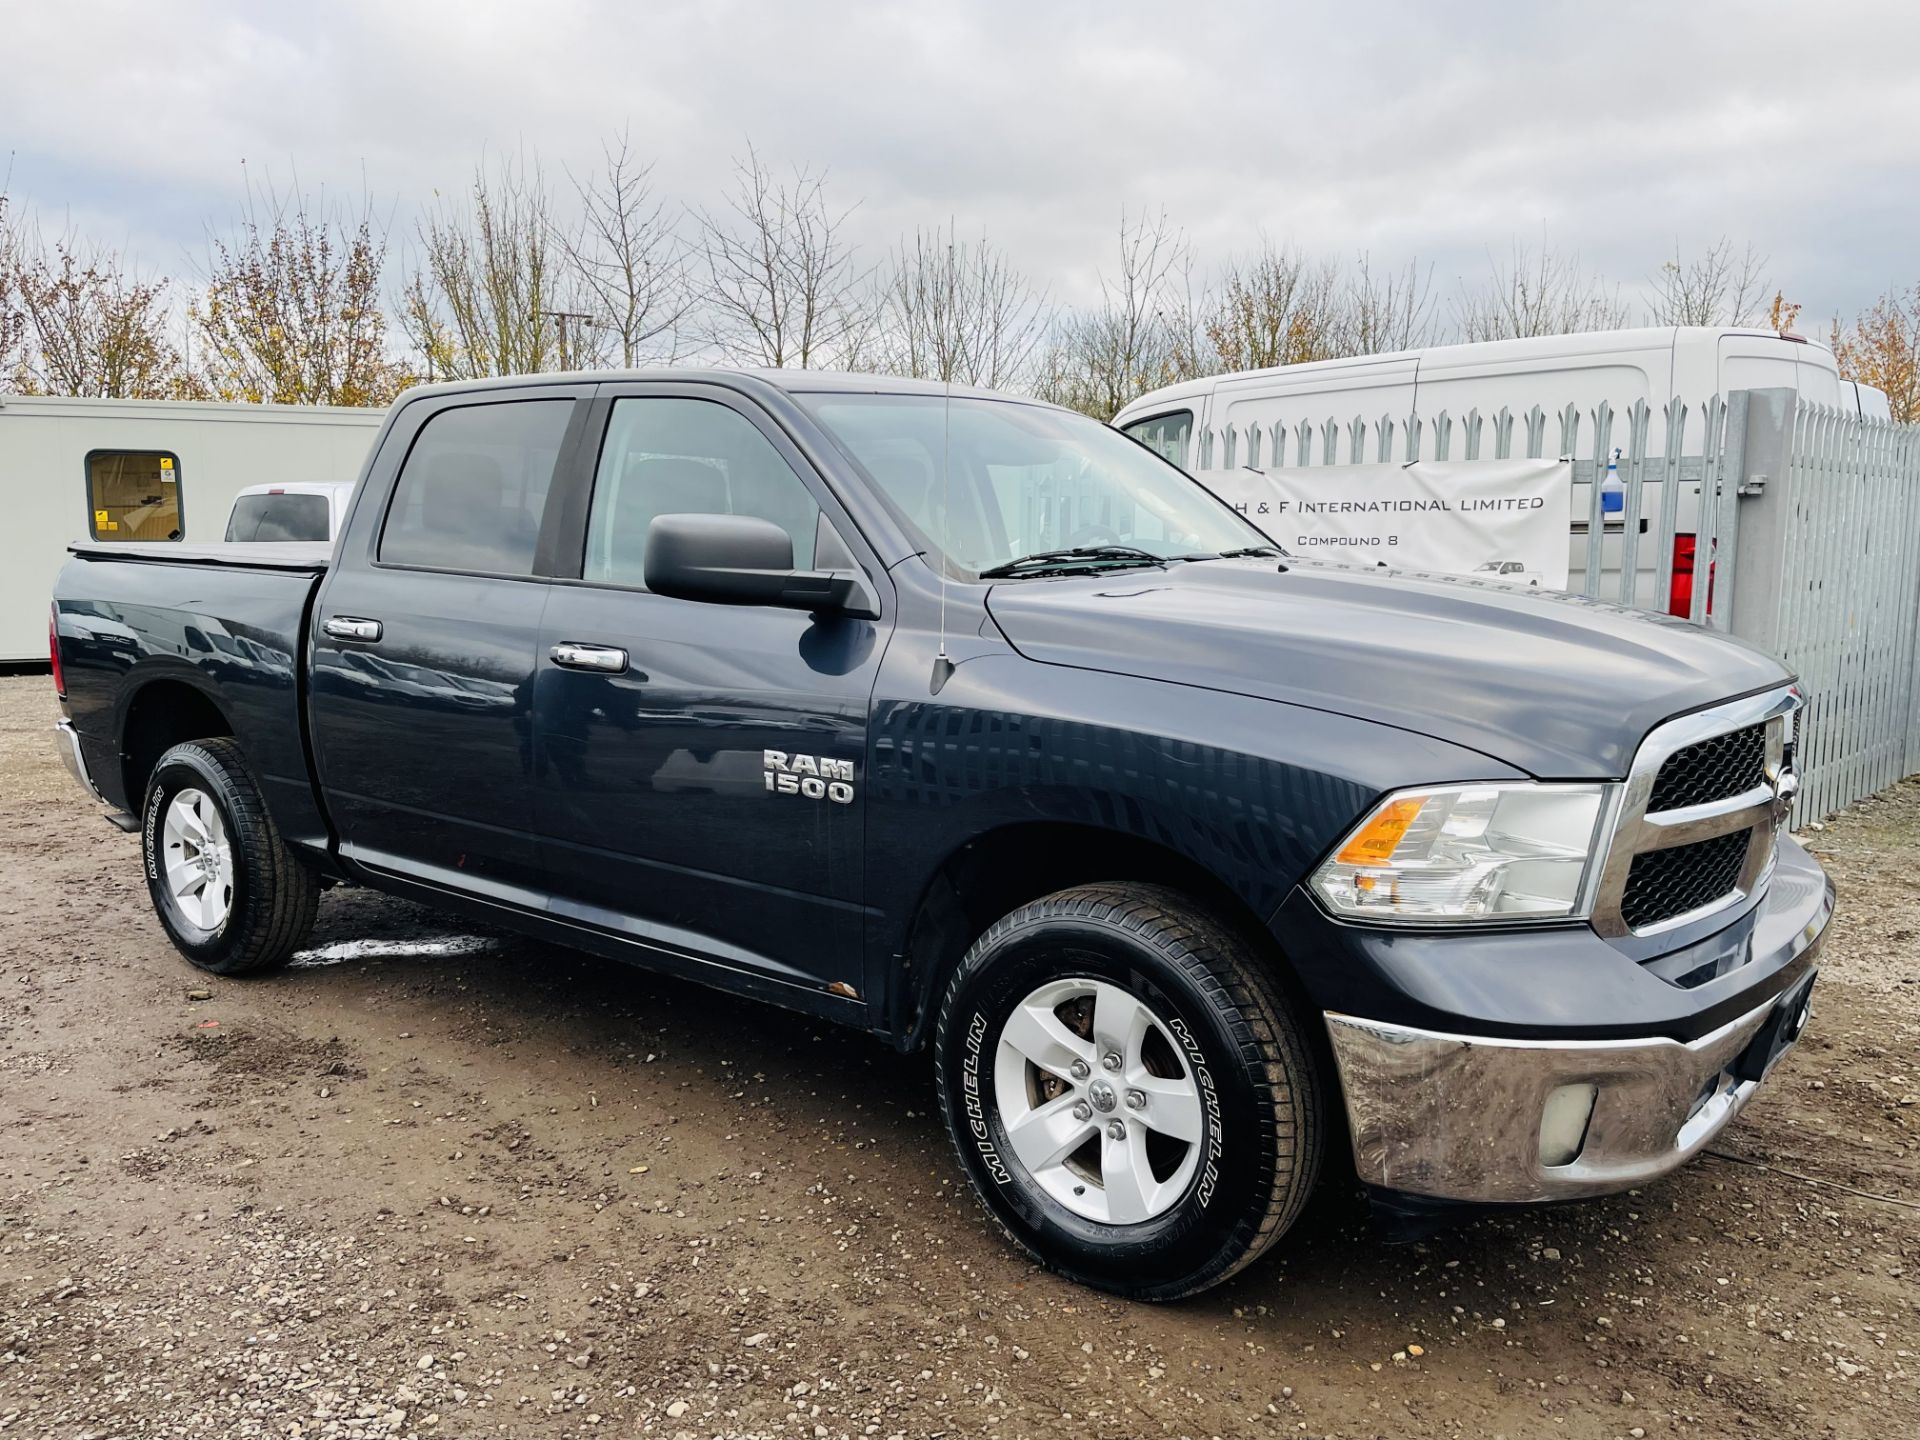 Dodge Ram 3.6 V6 1500 Crew Cab SLT 4WD ' 2015 Year ' A/C - 6 Seats - Chrome Package - Image 11 of 21